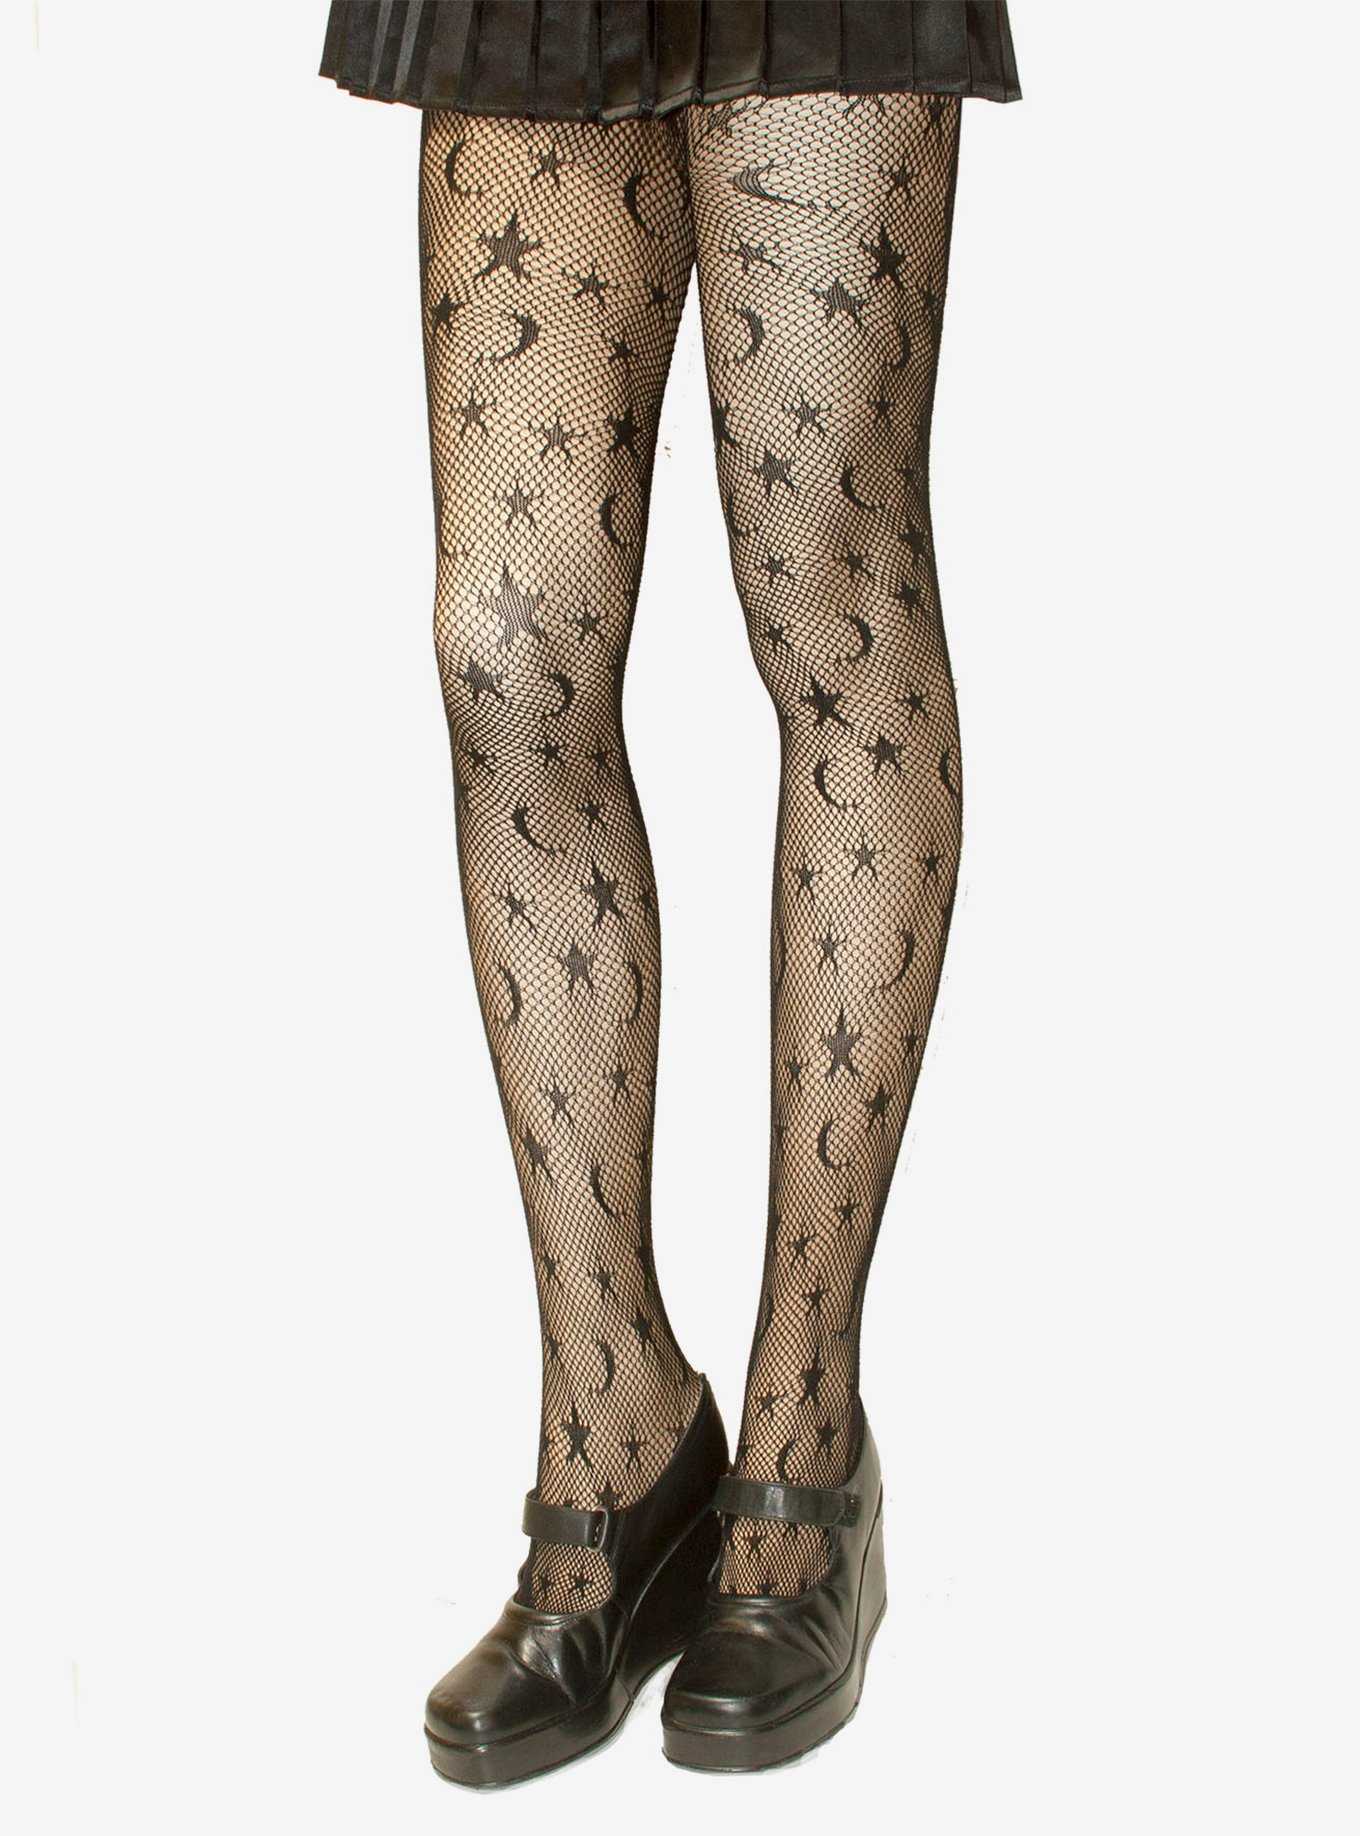 Star Pattern Fishnet Tights In Black - Epic Party Tights